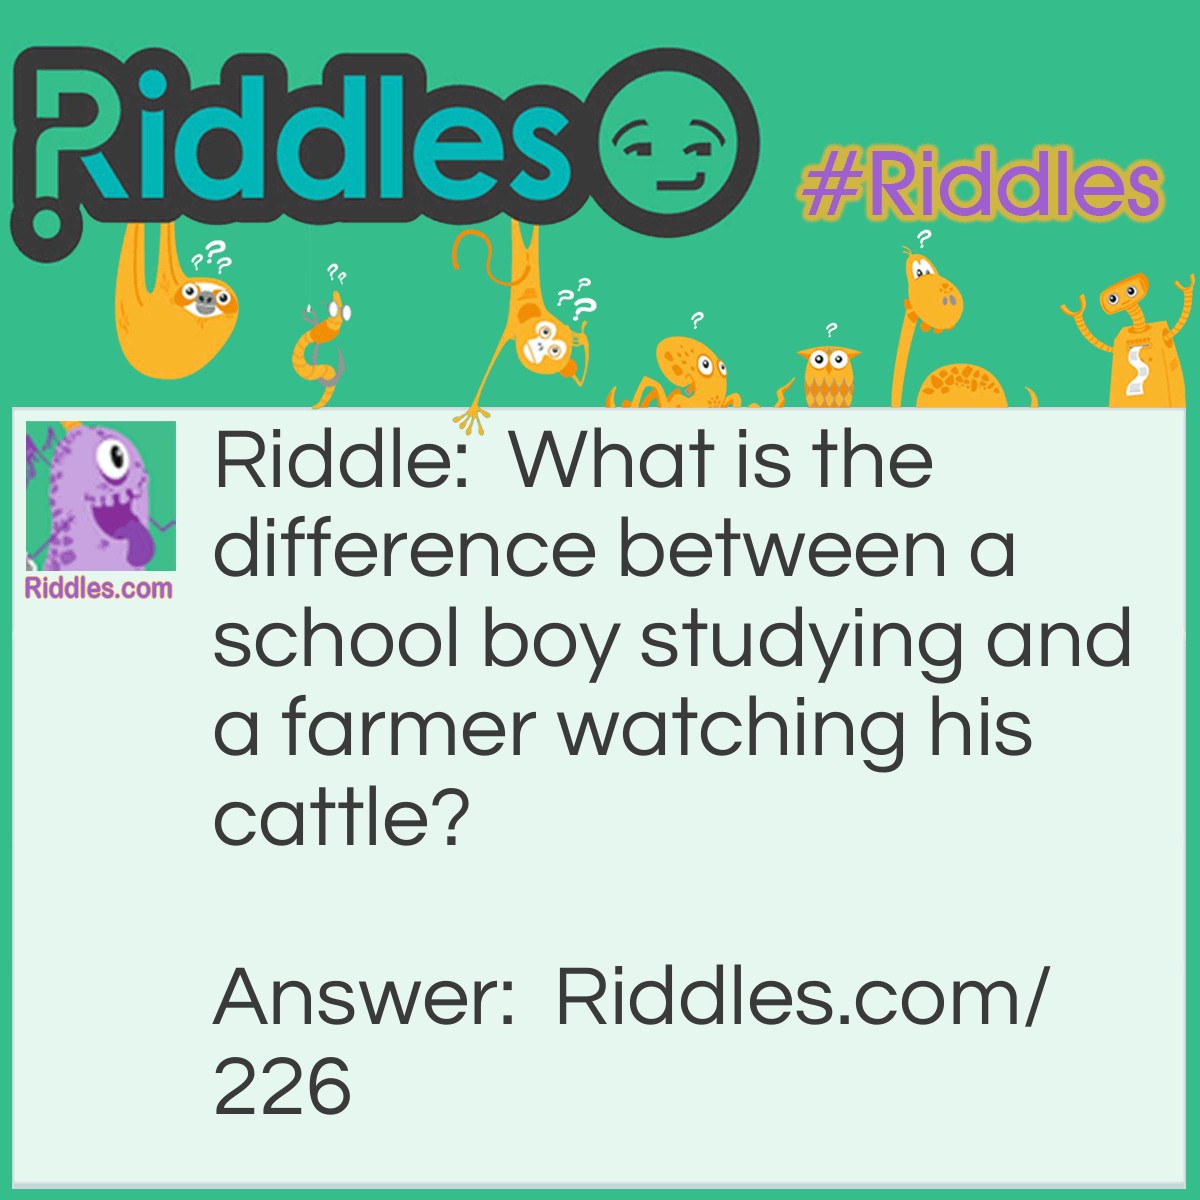 Riddle: What is the difference between a school boy studying and a farmer watching his cattle? Answer: One is stocking his mind, while the other is minding his stock.